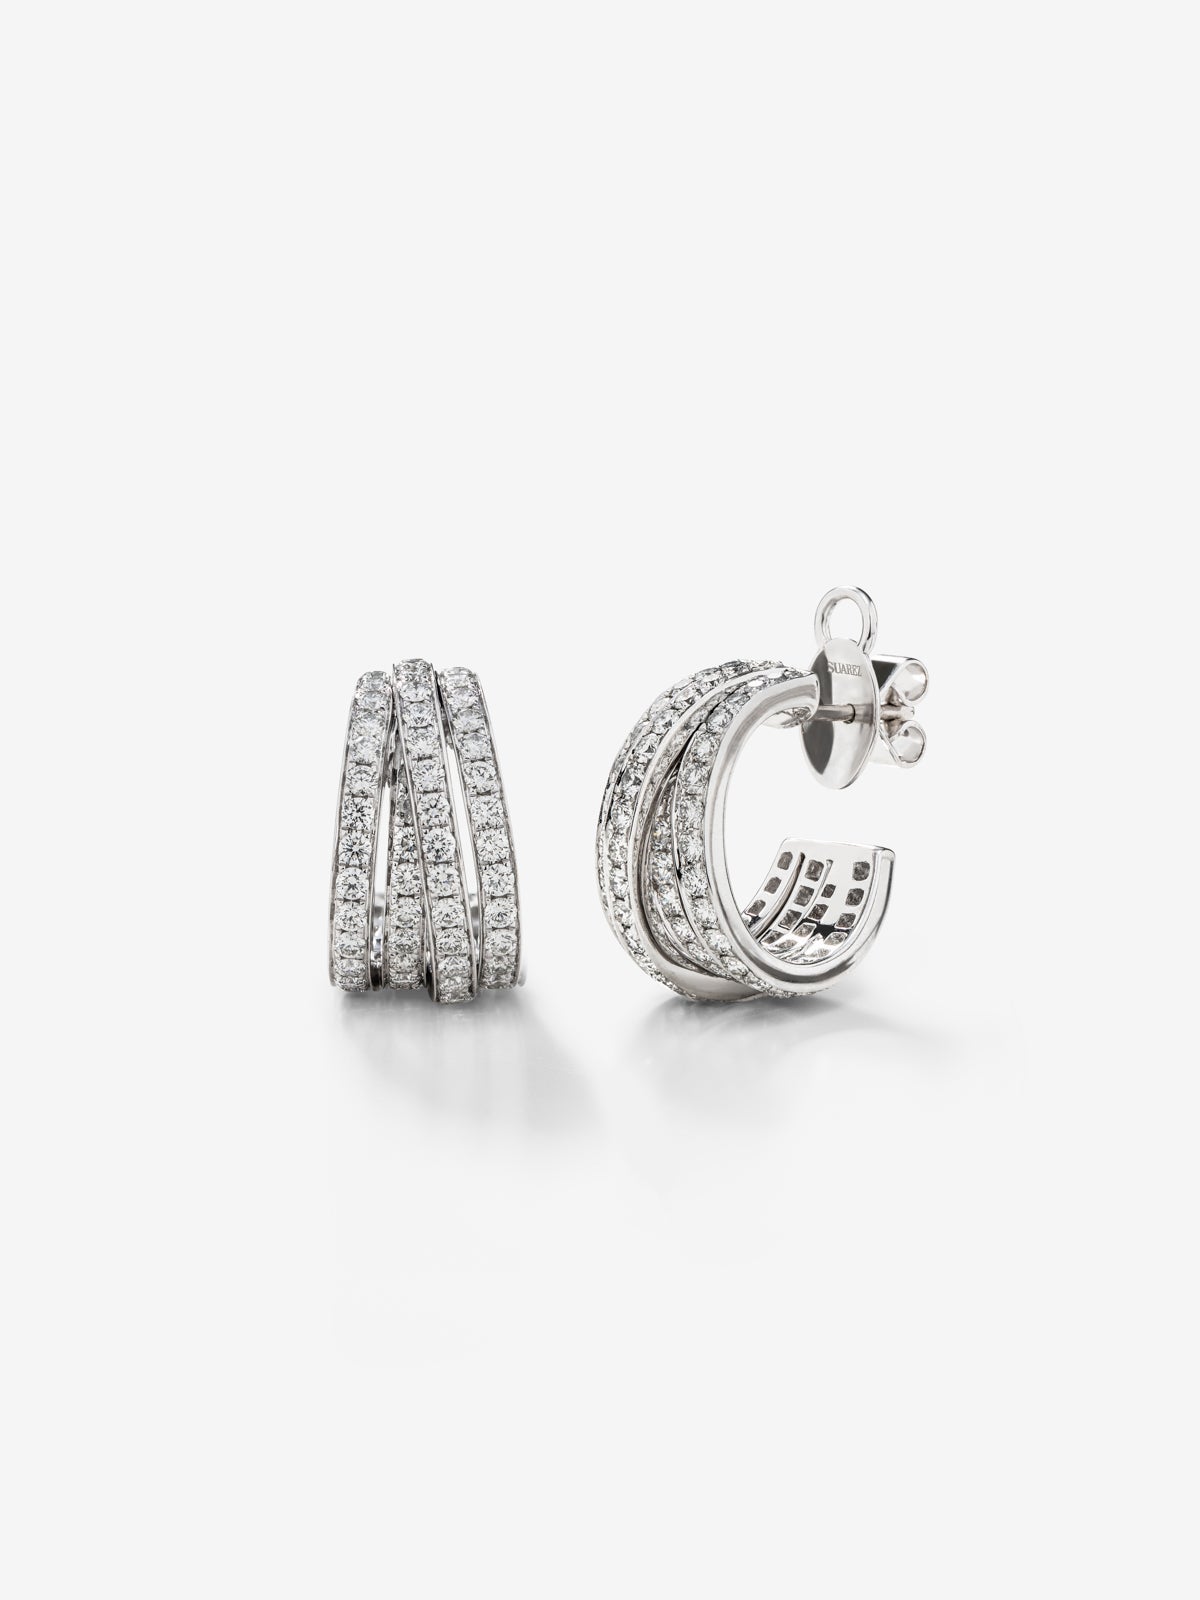 18K white gold hoop earrings with 150 brilliant-cut diamonds with a total of 2.9 cts